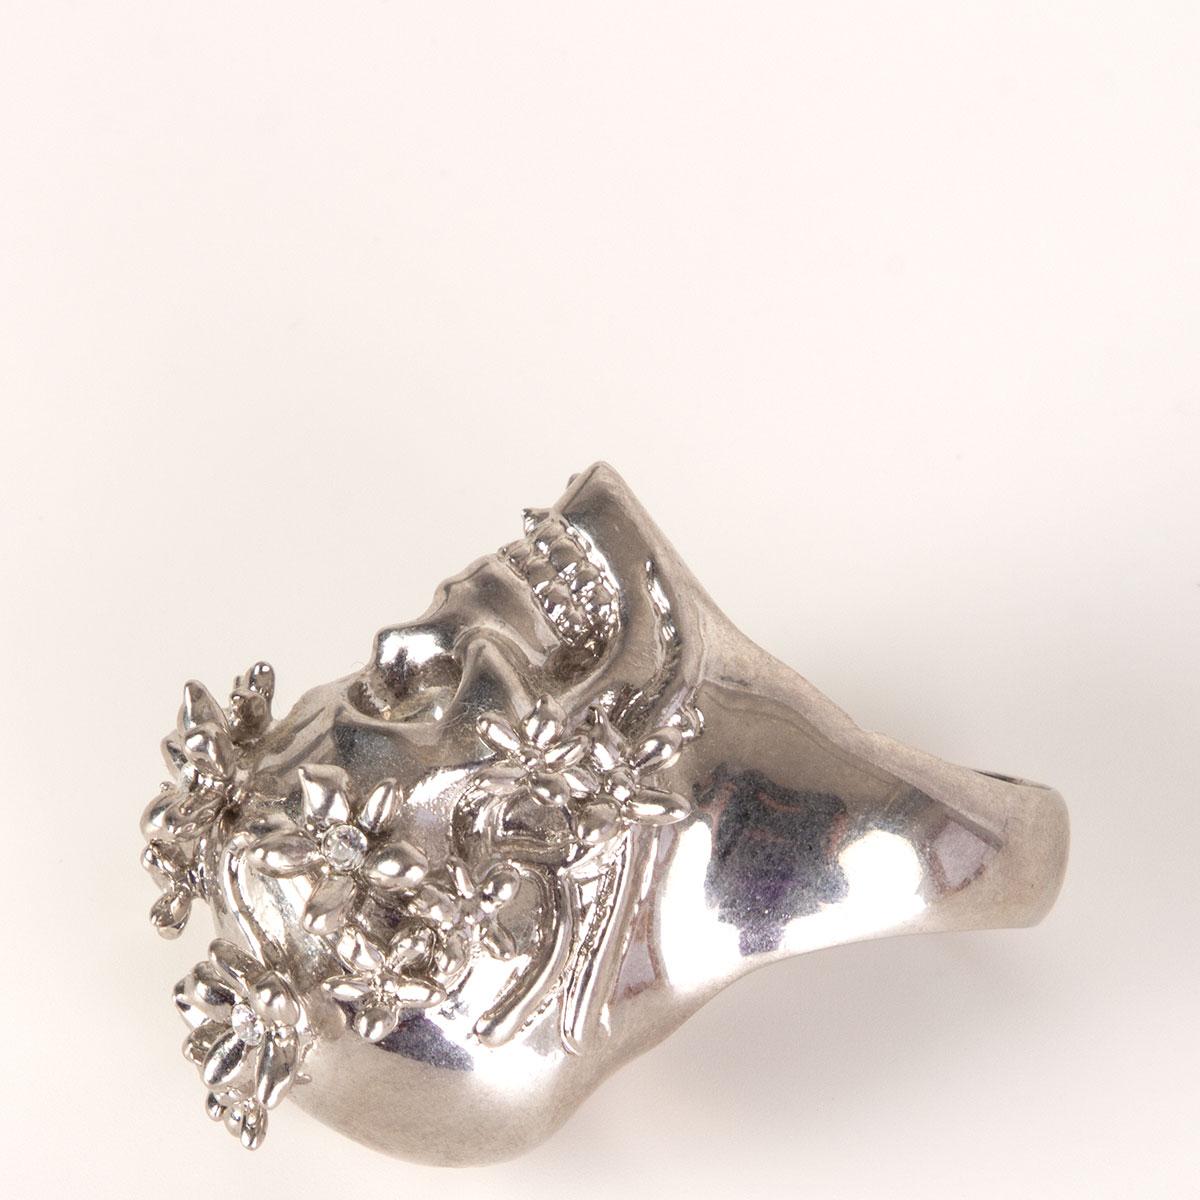 Alexander McQueen skull ring in silver-tone brass with crystal eyes and flower embellishments. Has been worn and is in excellent condition.

Tag Size 7
Width 3cm (1.2in)
Length 3cm (1.2in)

